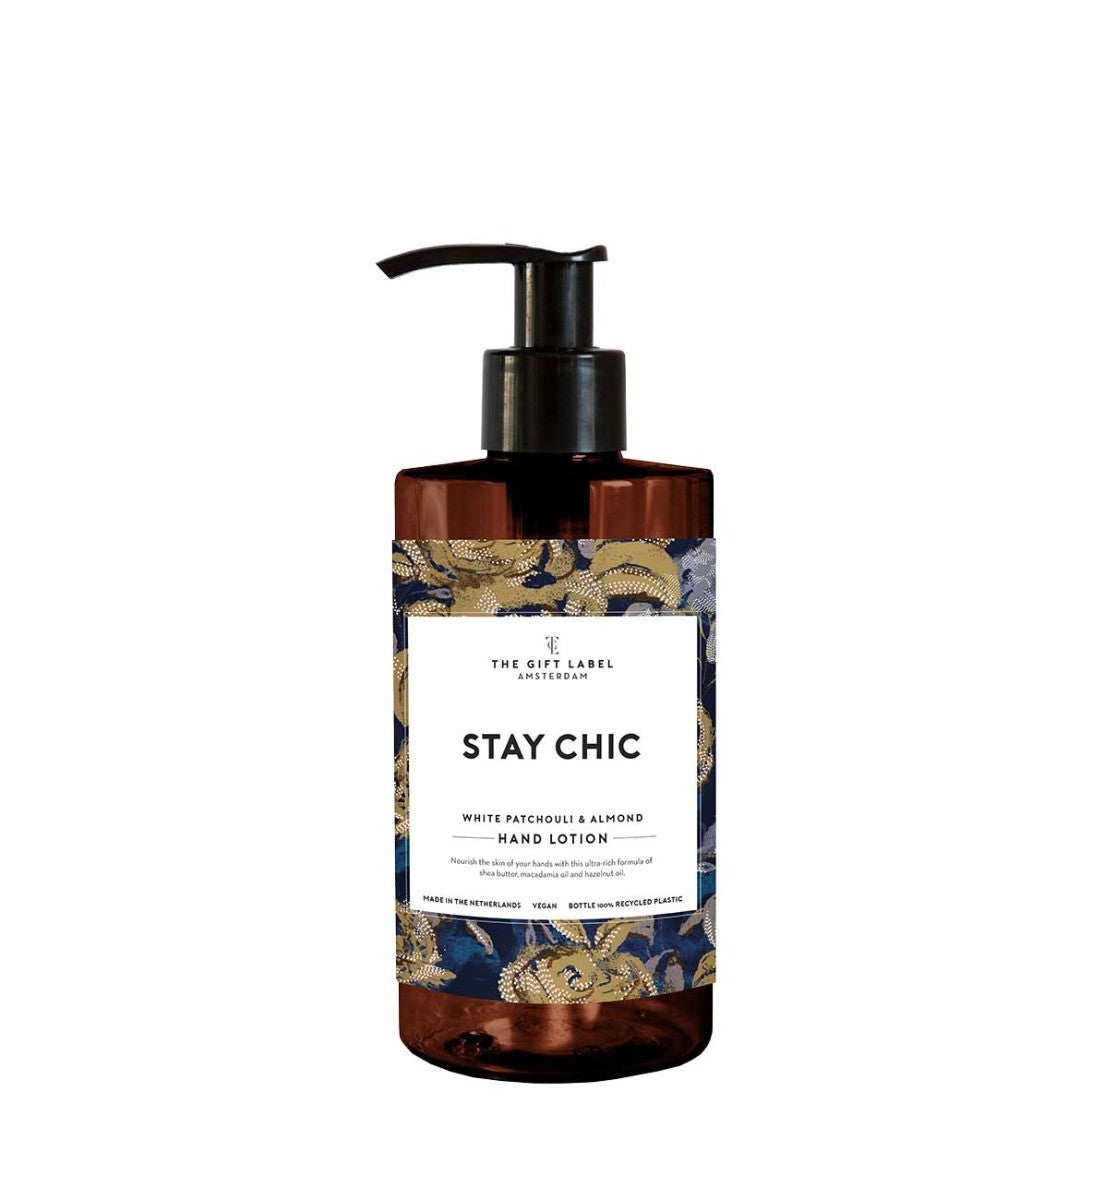 Hand Lotion - Stay Chic